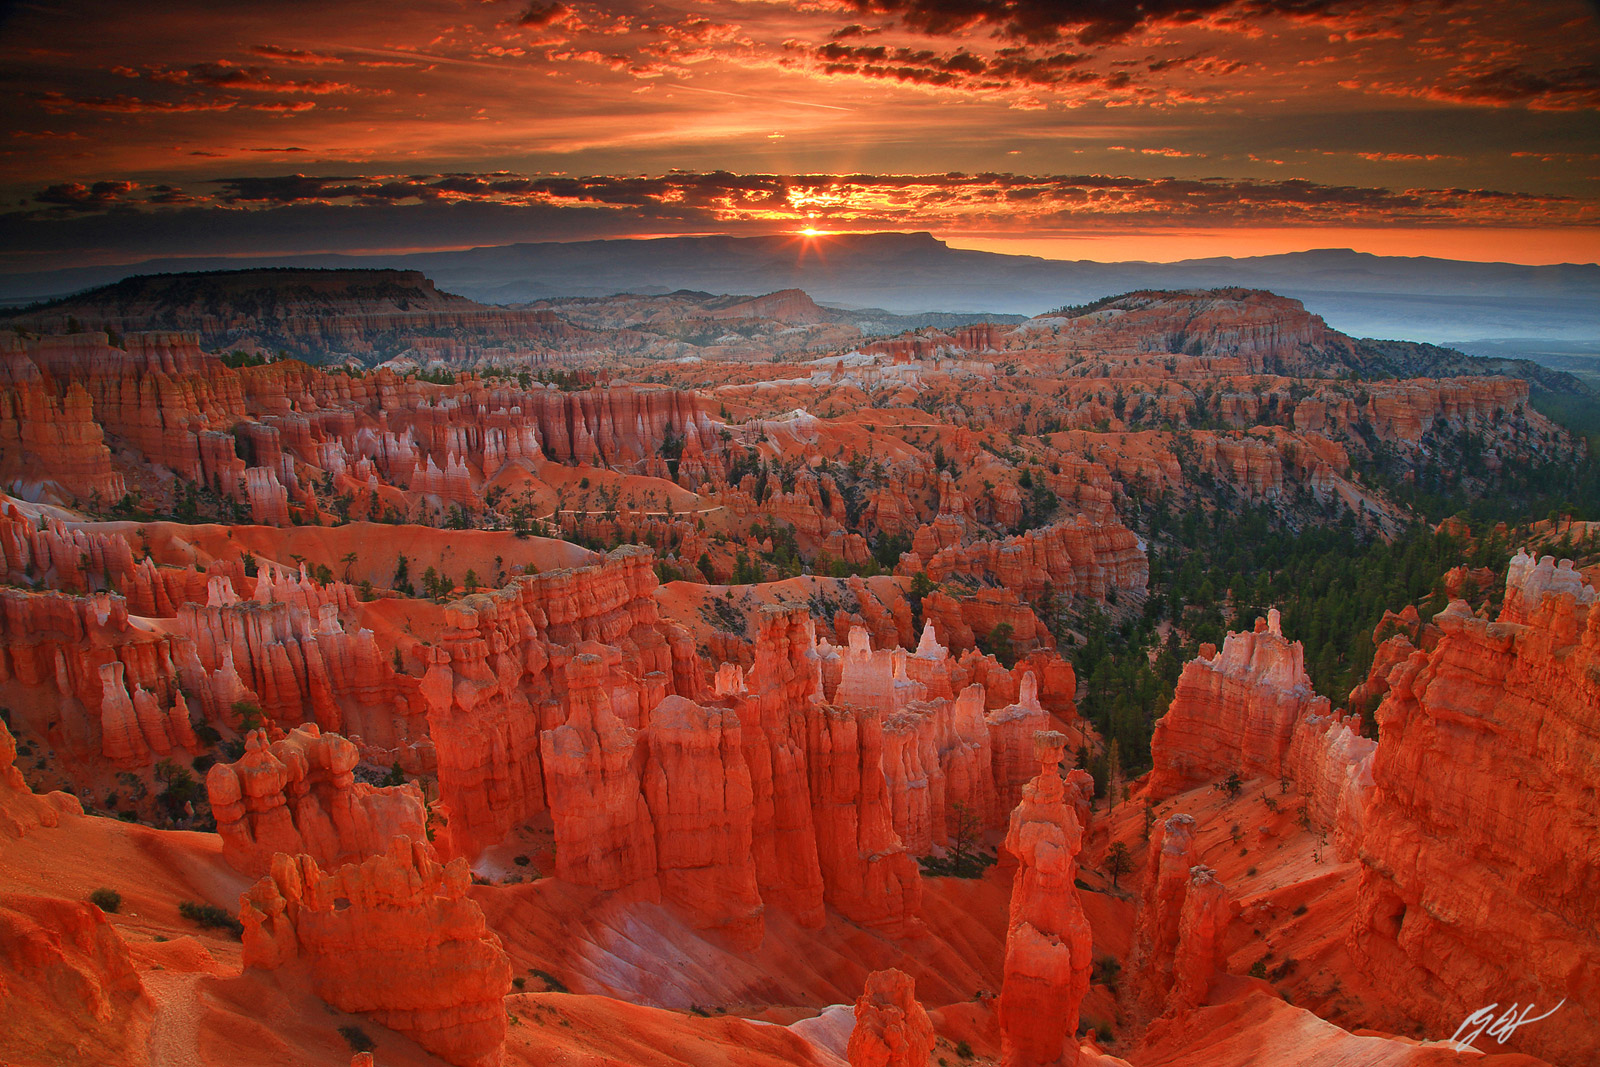 Sunrise over Hoodoos from Sunset Point in Bryce Canyon National Park in Utah